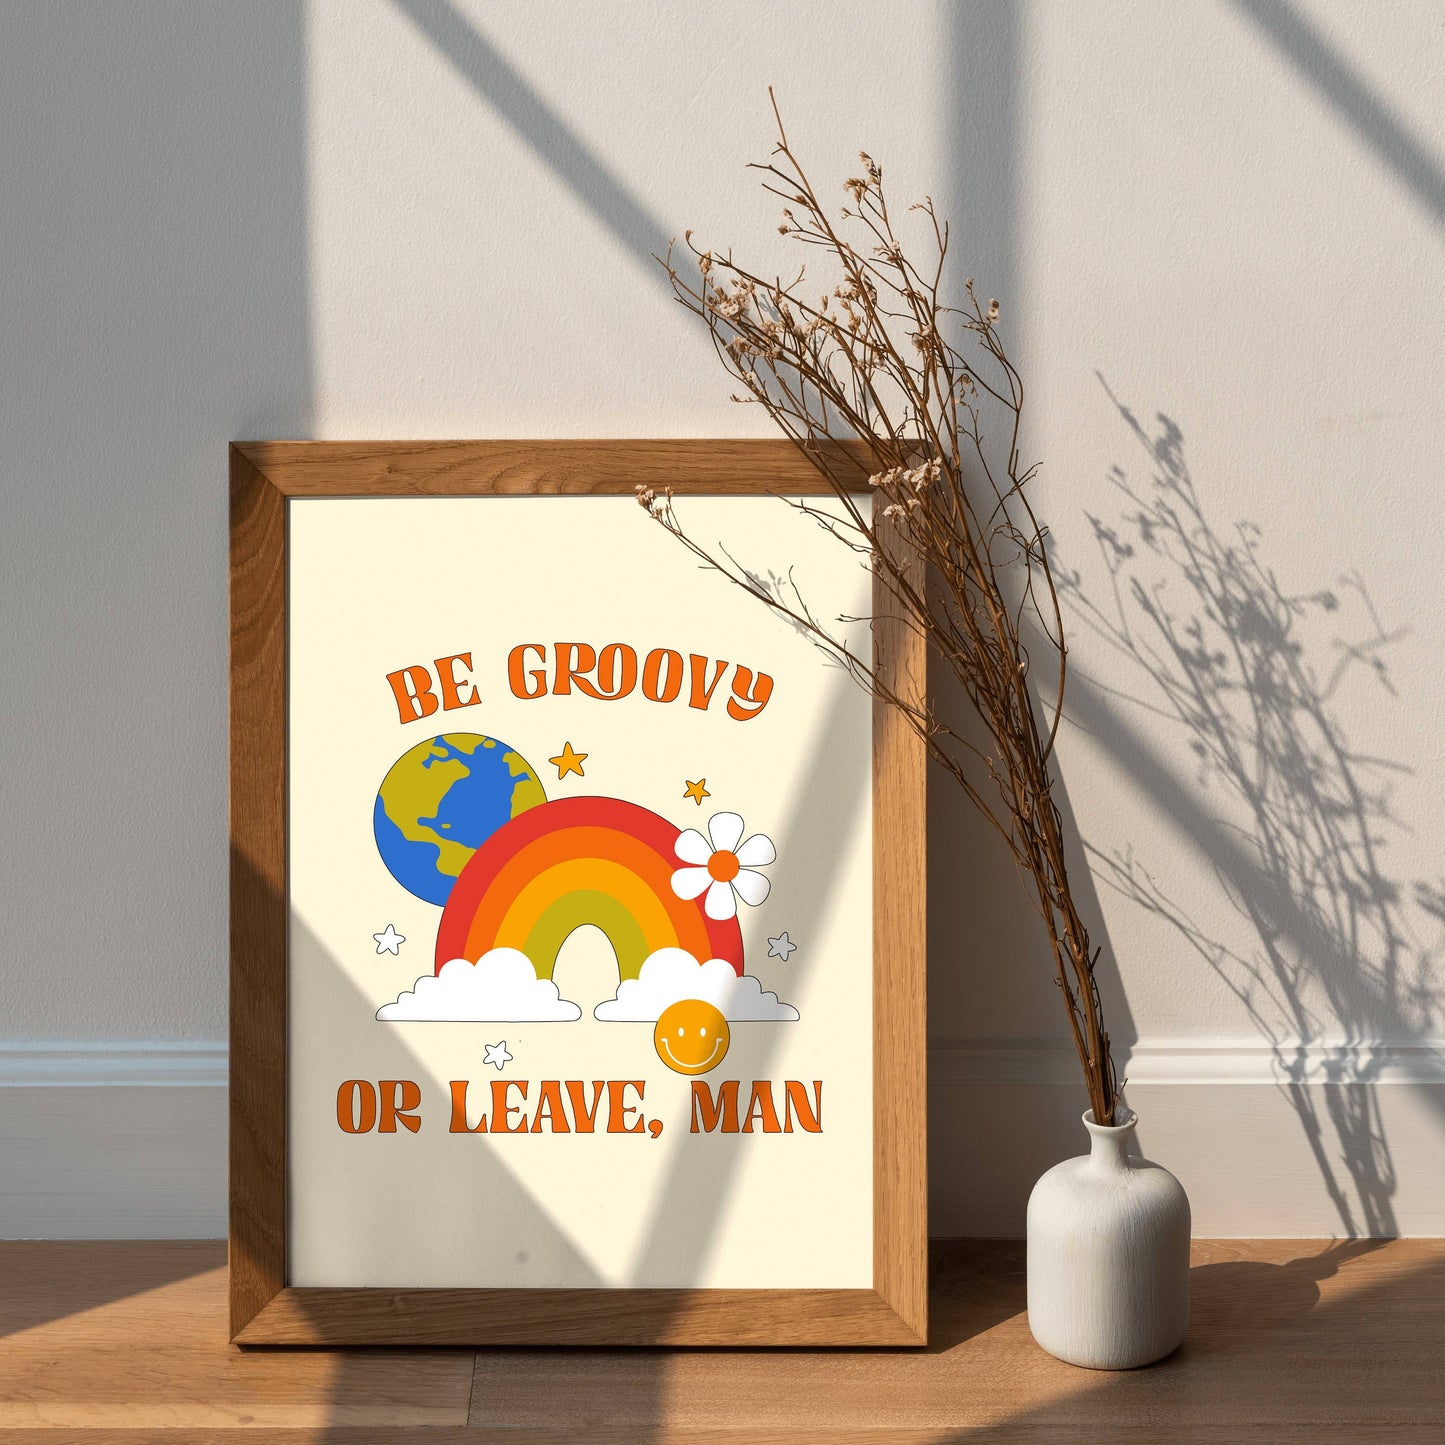 Be Groovy or Leave Man Print, Retro 70s Quote Lyric Print